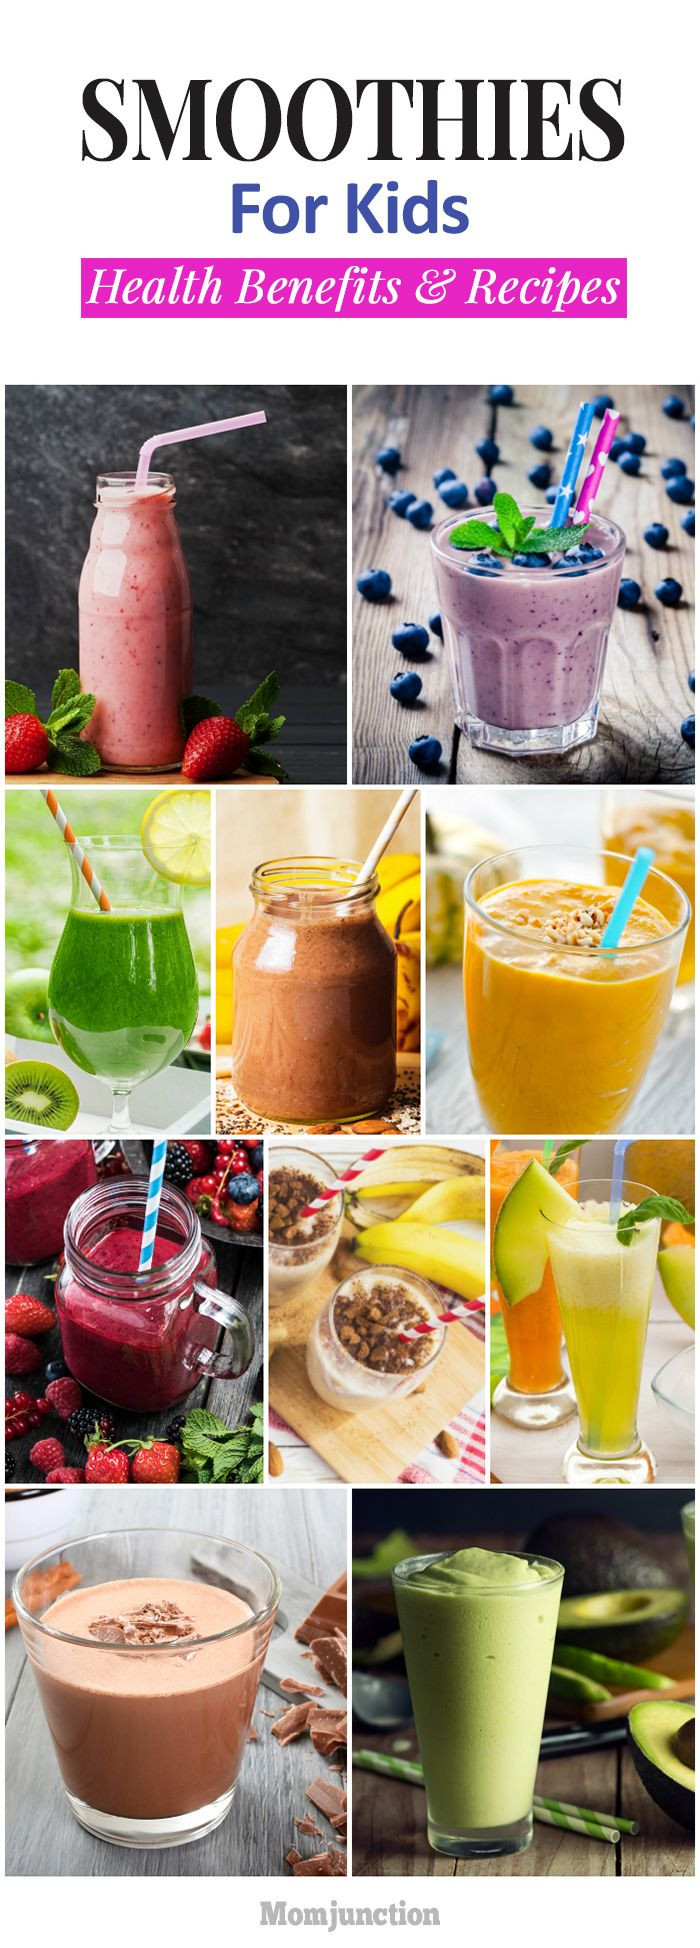 Healthy Kid Friendly Smoothies
 21 Easy And Healthy Smoothies For Kids